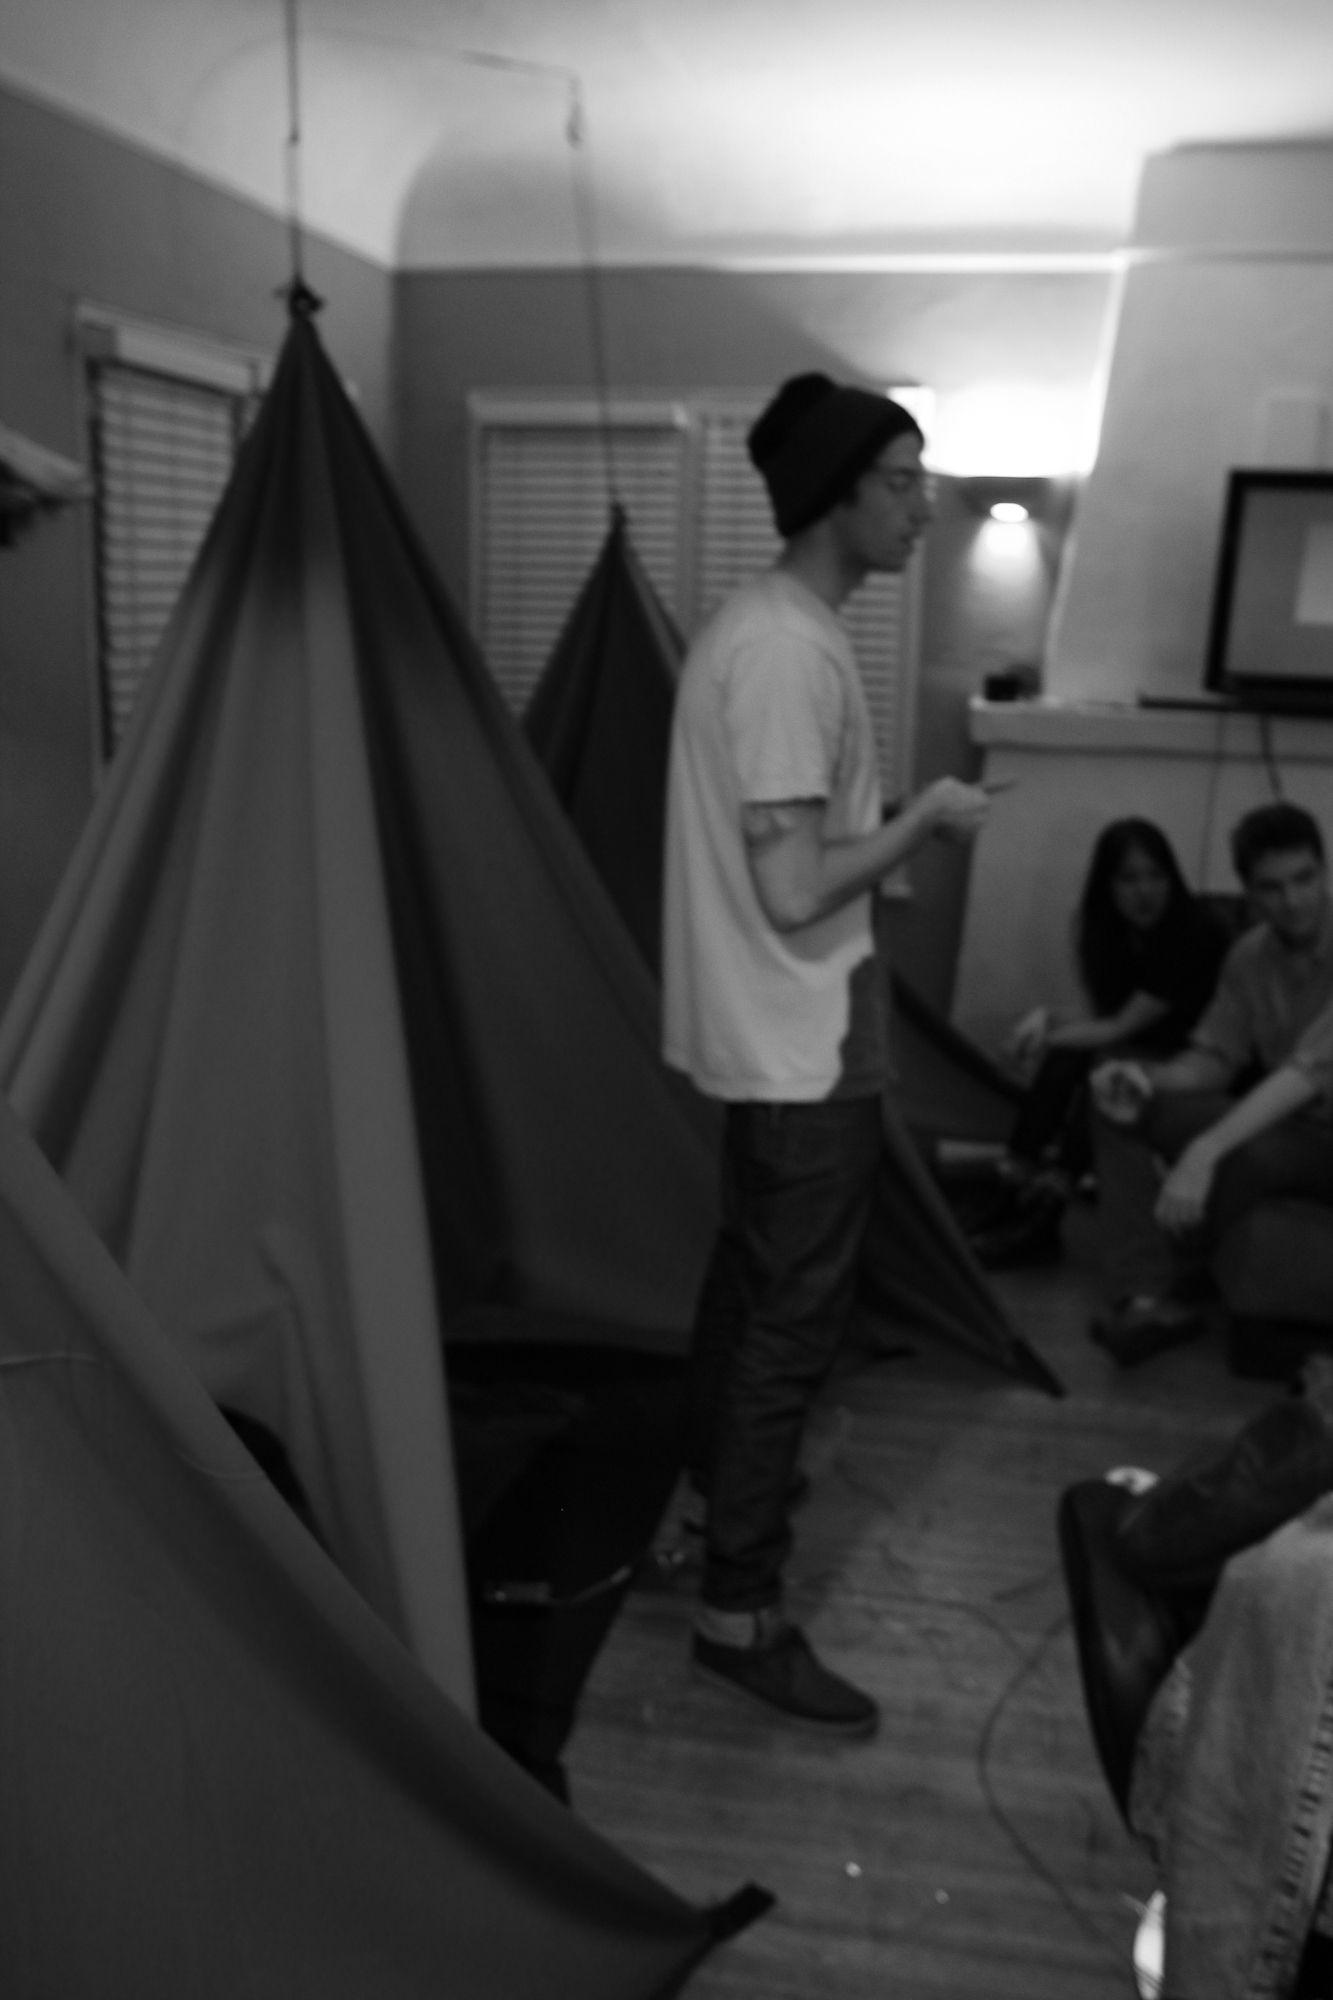 There is a dark, grayscale picture of people sitting inside a small room. There are three tents in the background. One person is standing and seems to be talking, and two people visible sitting down. Everyone is smiling.